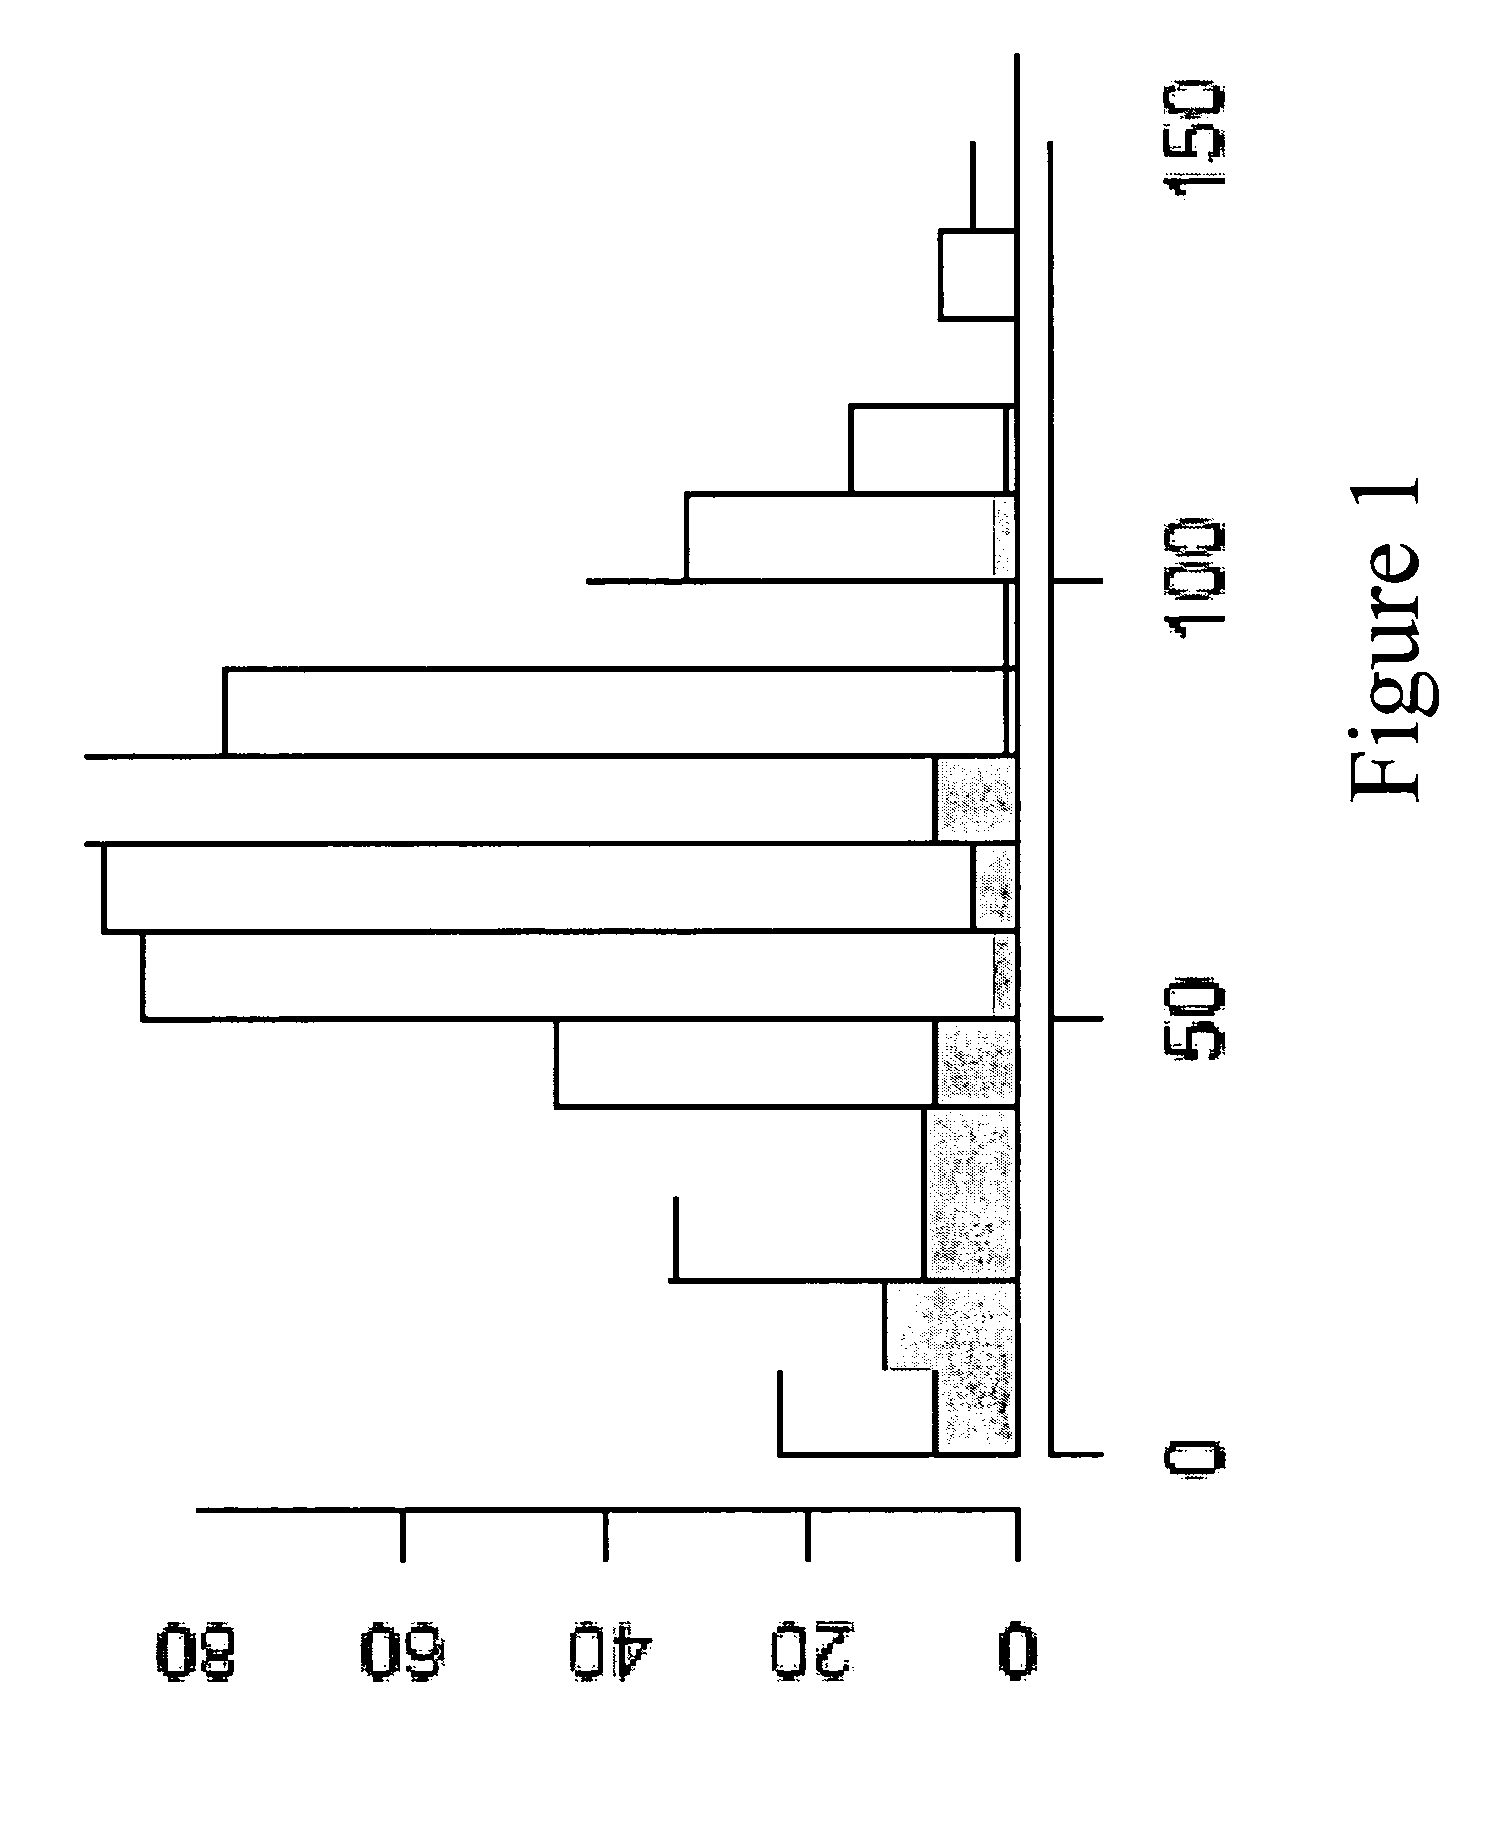 Methods and Nucleic Acids For the Analysis of Gene Expression Associated With the Prognosis of Cell Proliferative Disorders